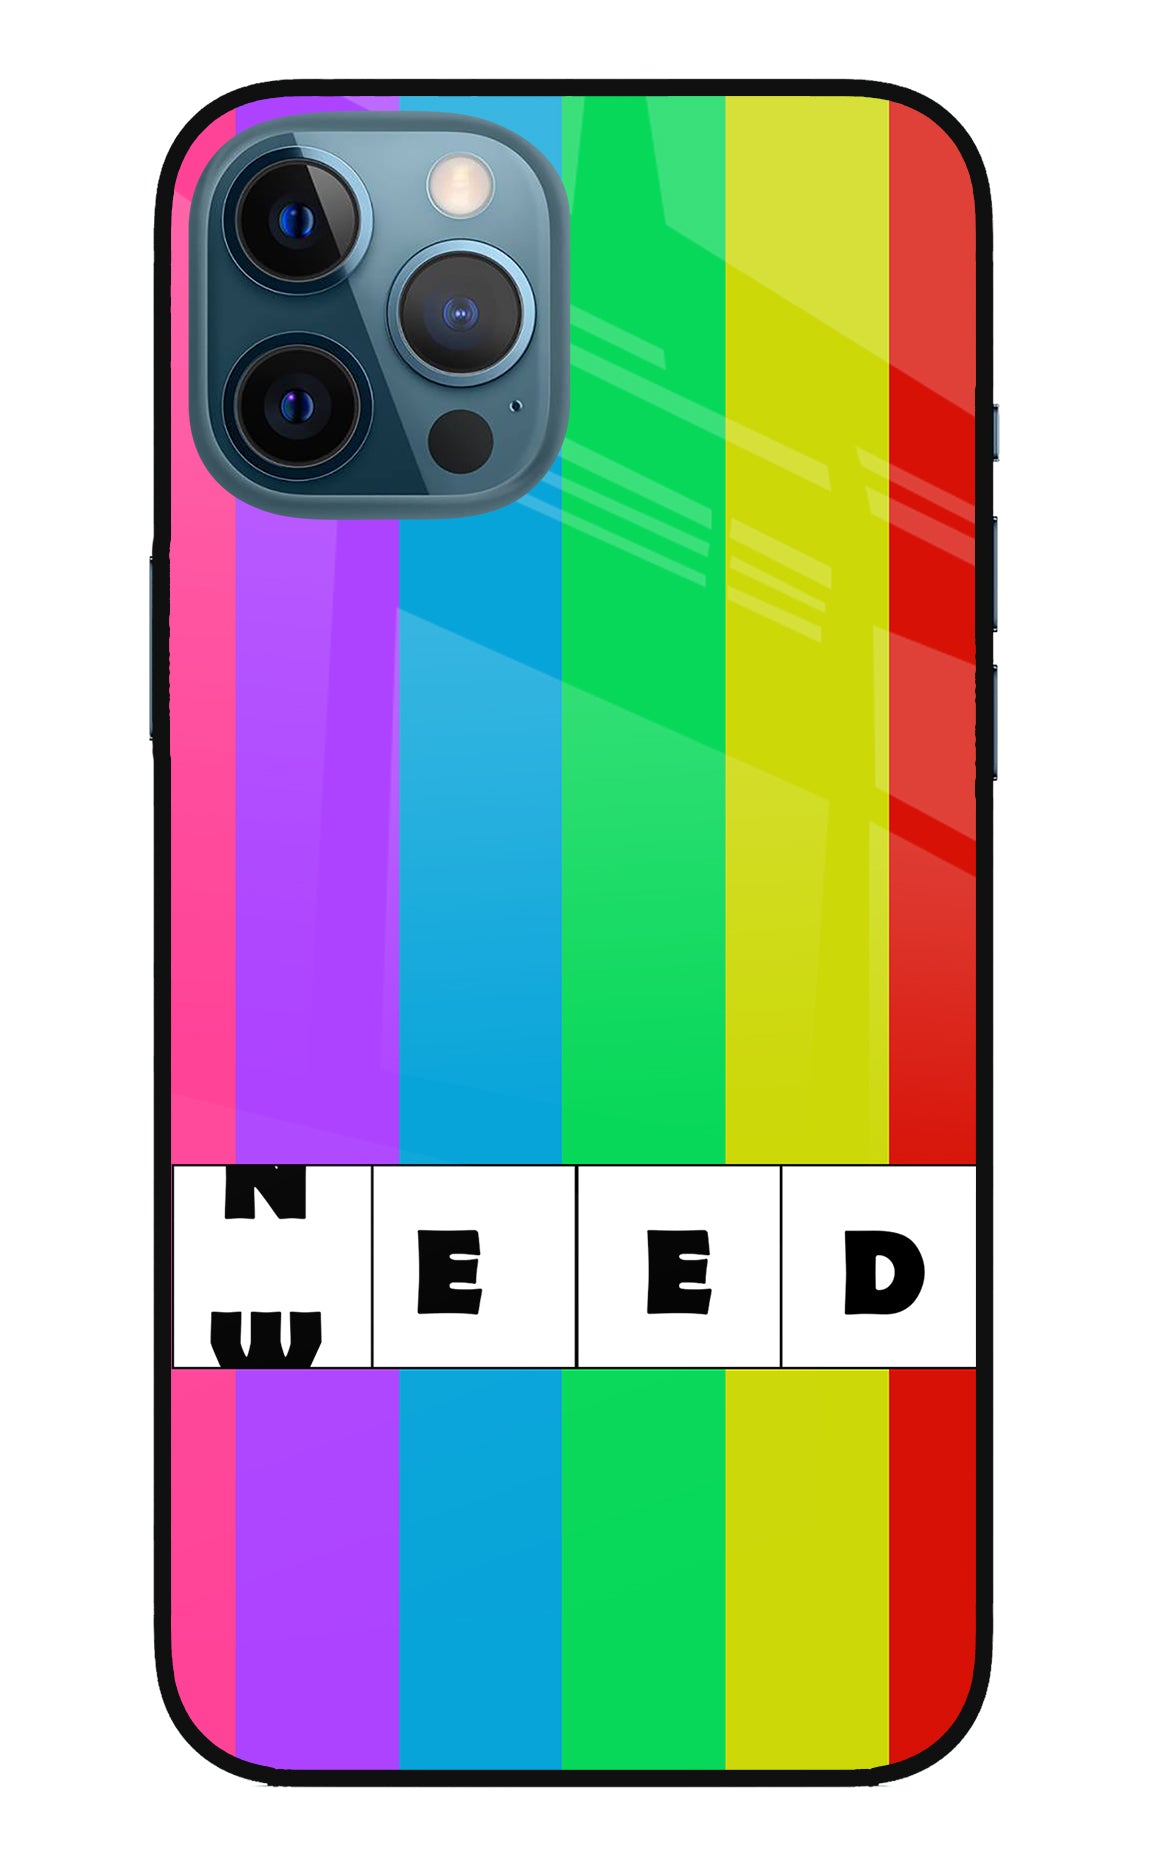 Need Weed iPhone 12 Pro Max Back Cover